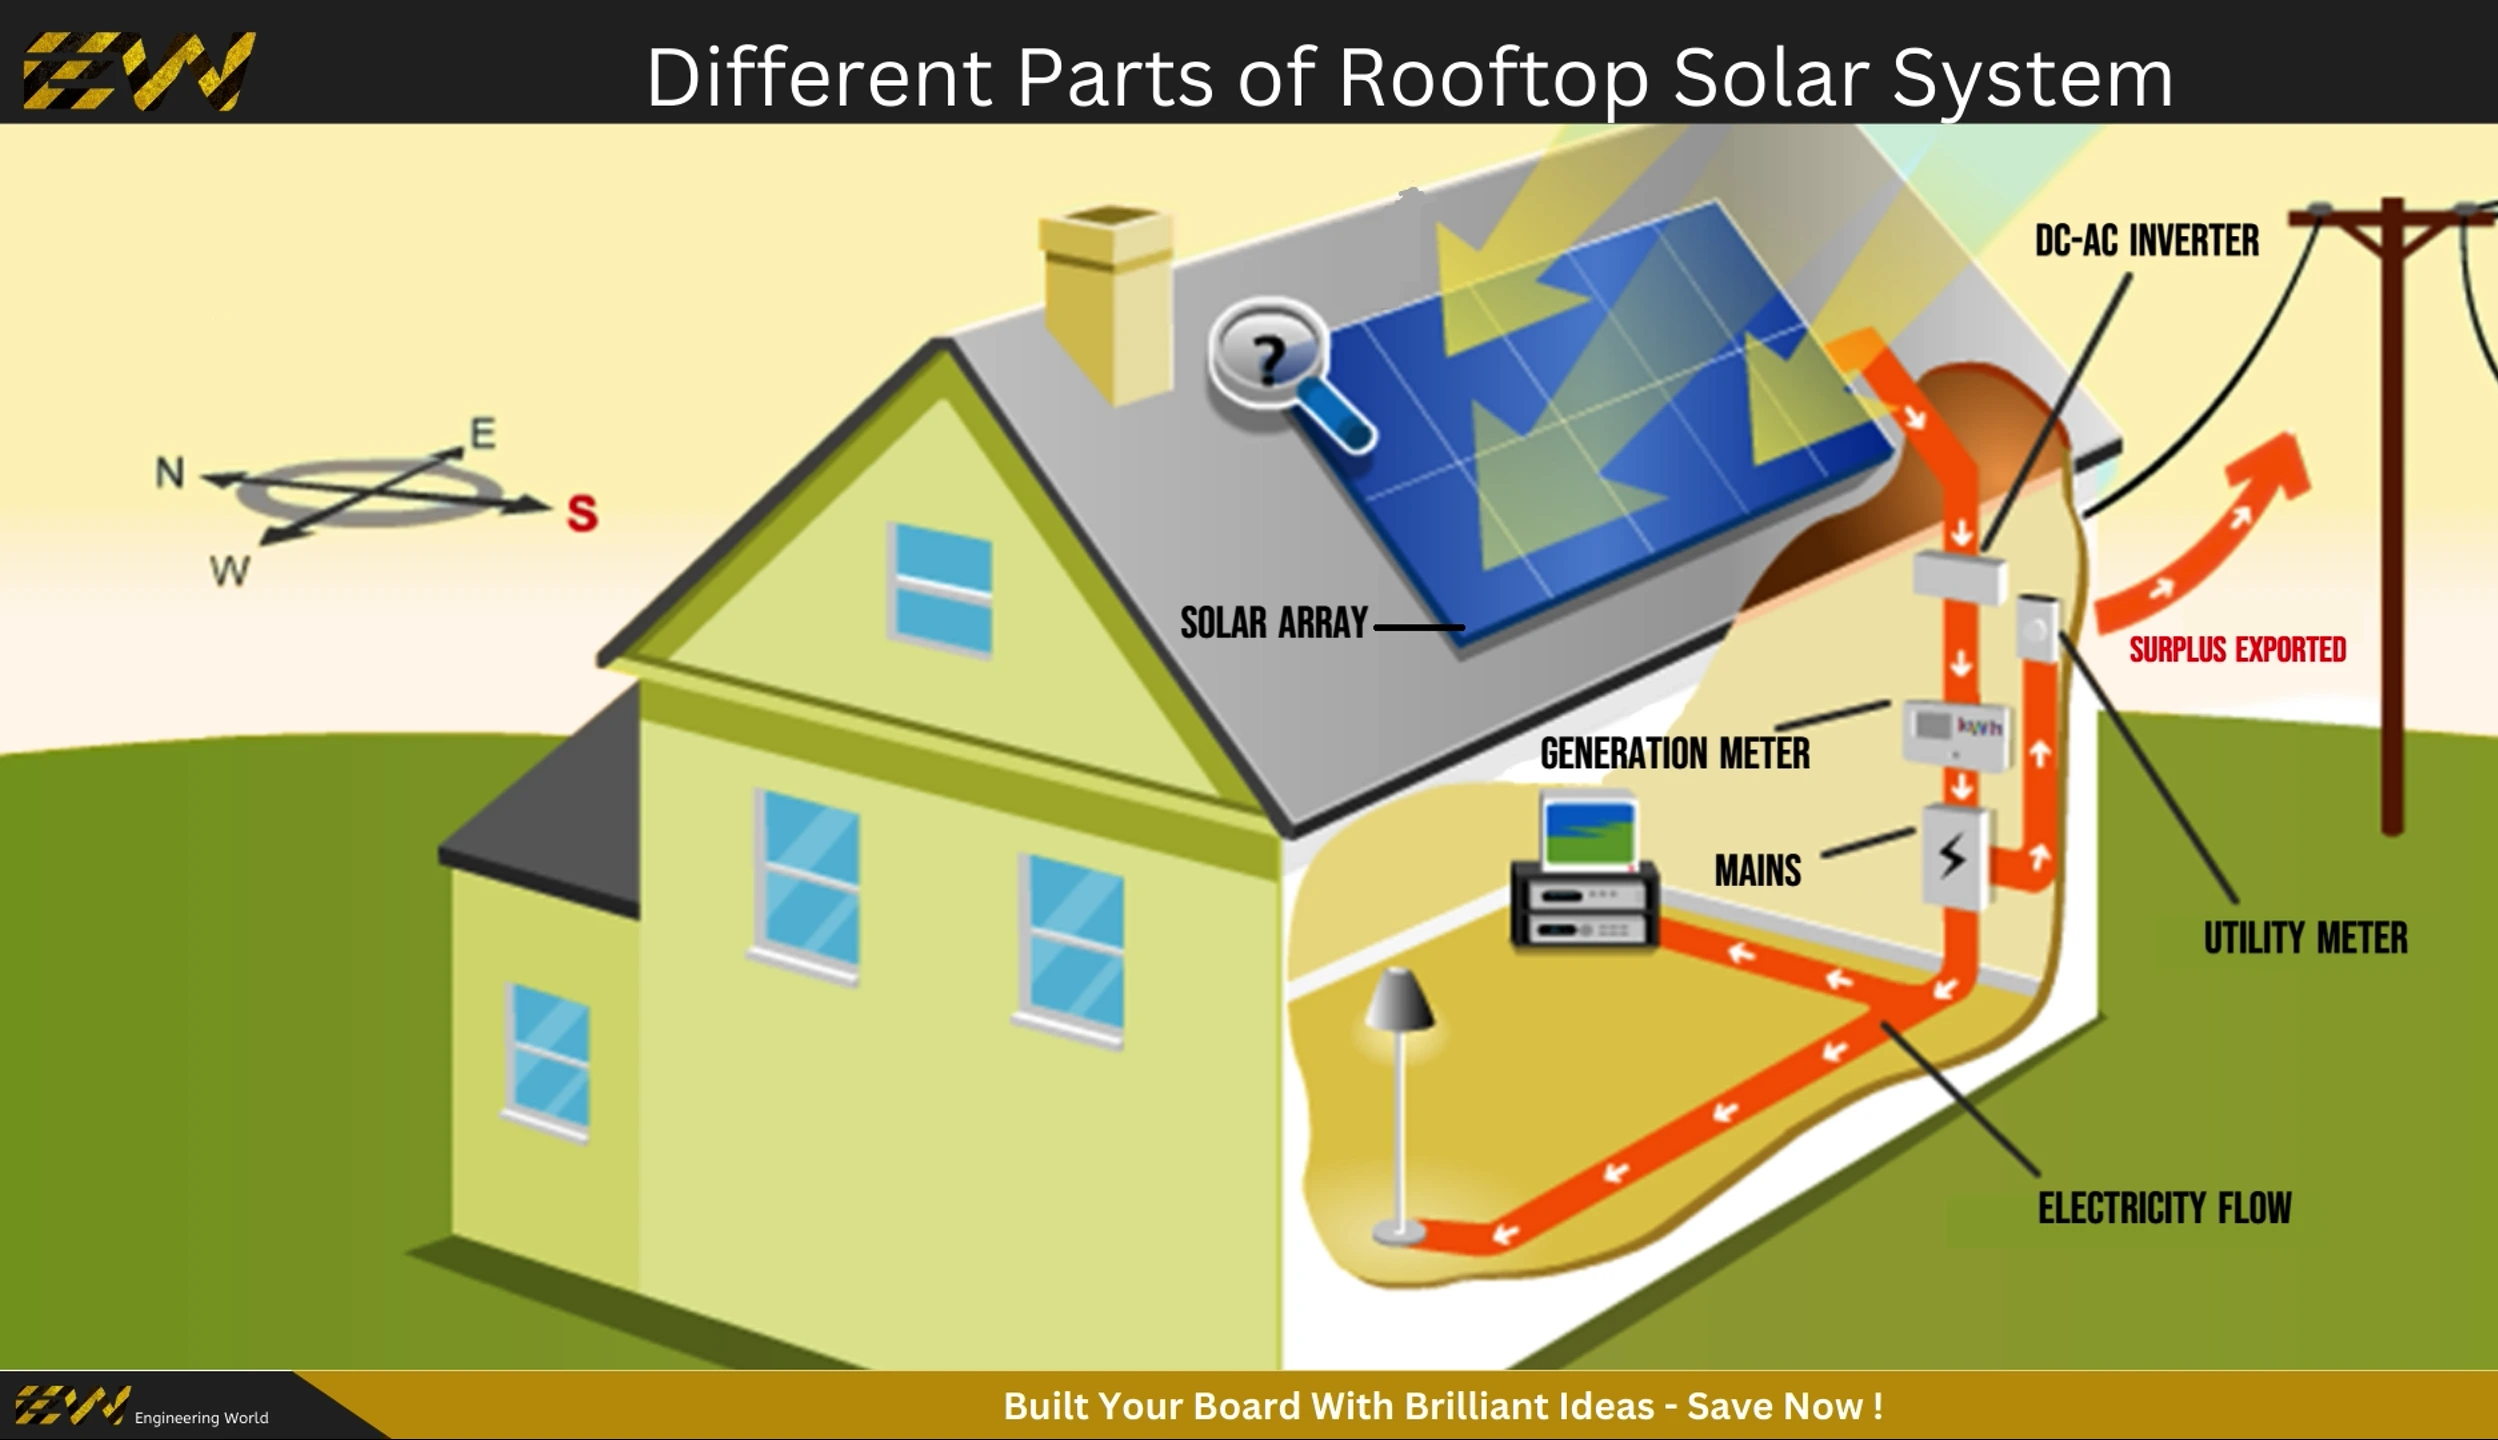 Rooftop solar system